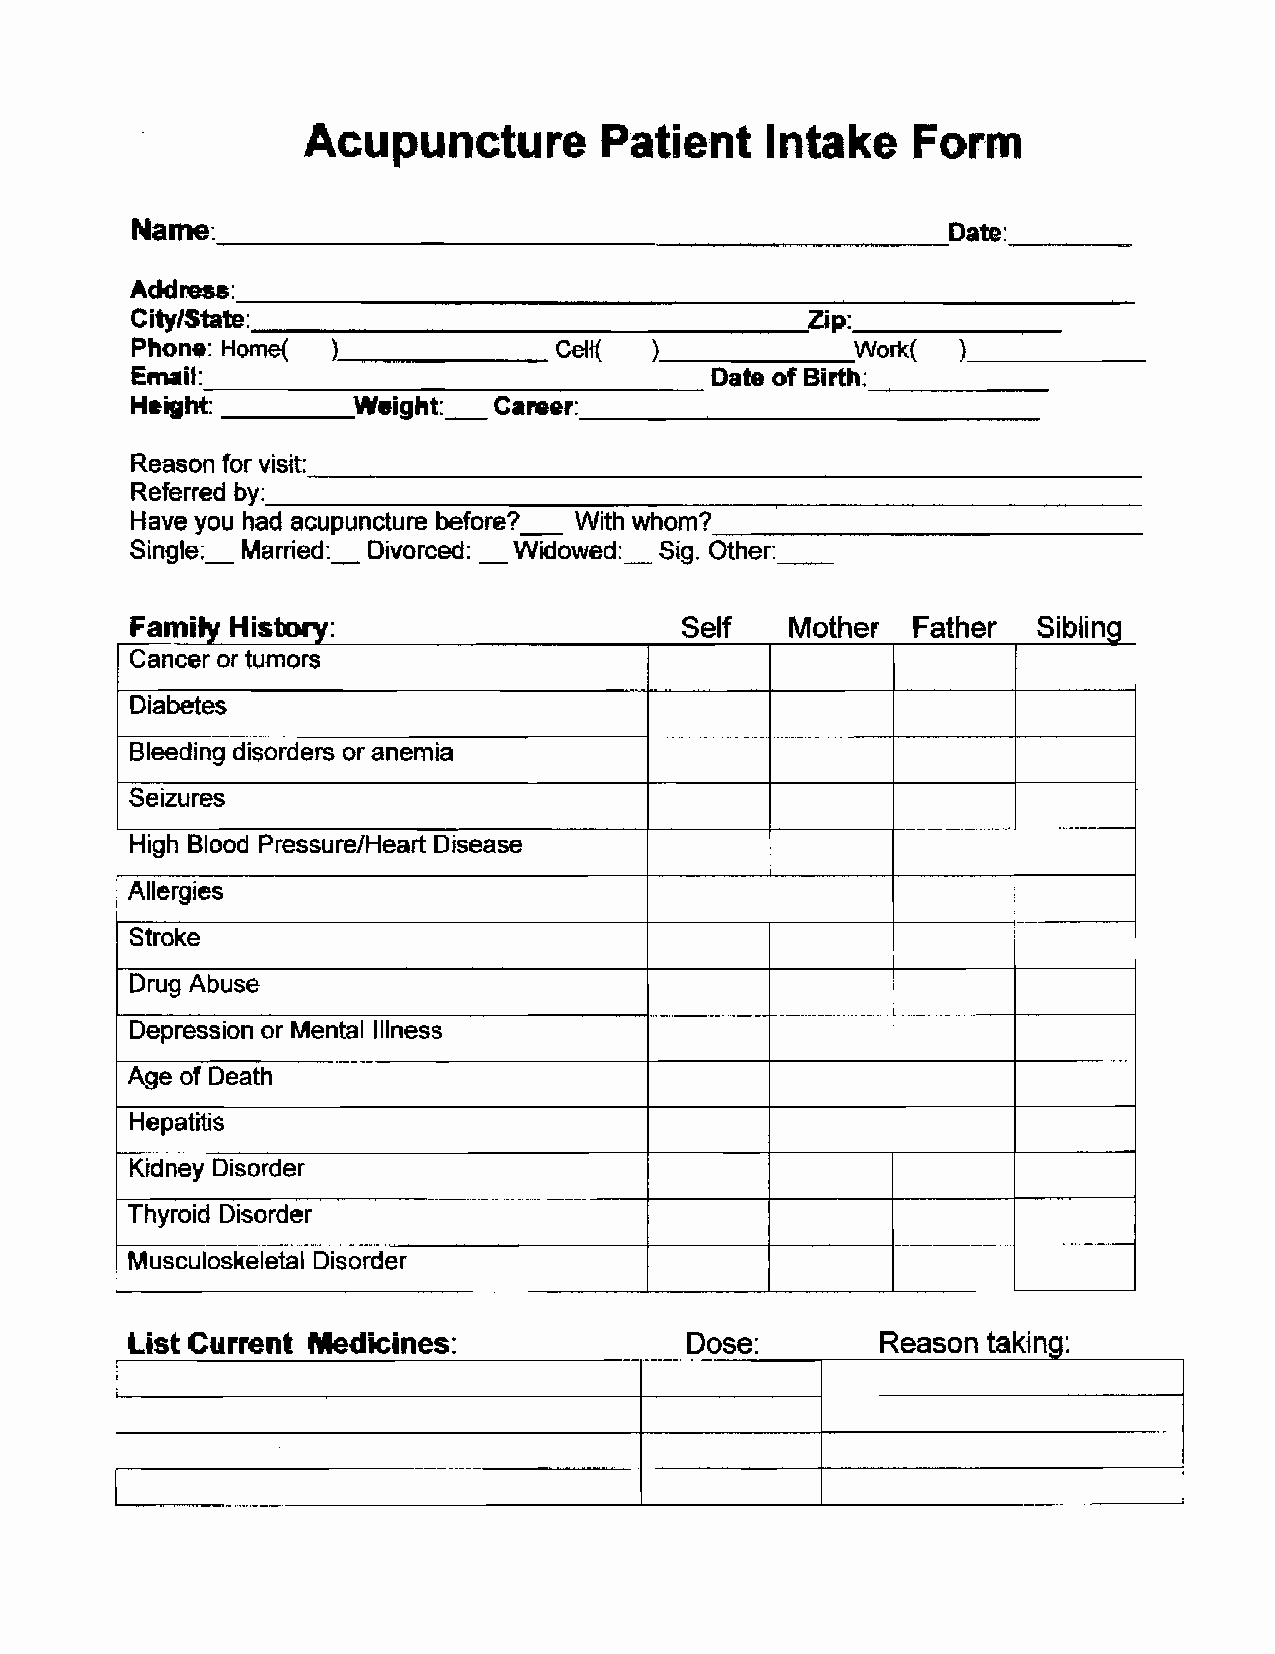 Patient Intake form Template Best Of Acupuncture forms Templates Reverse Search